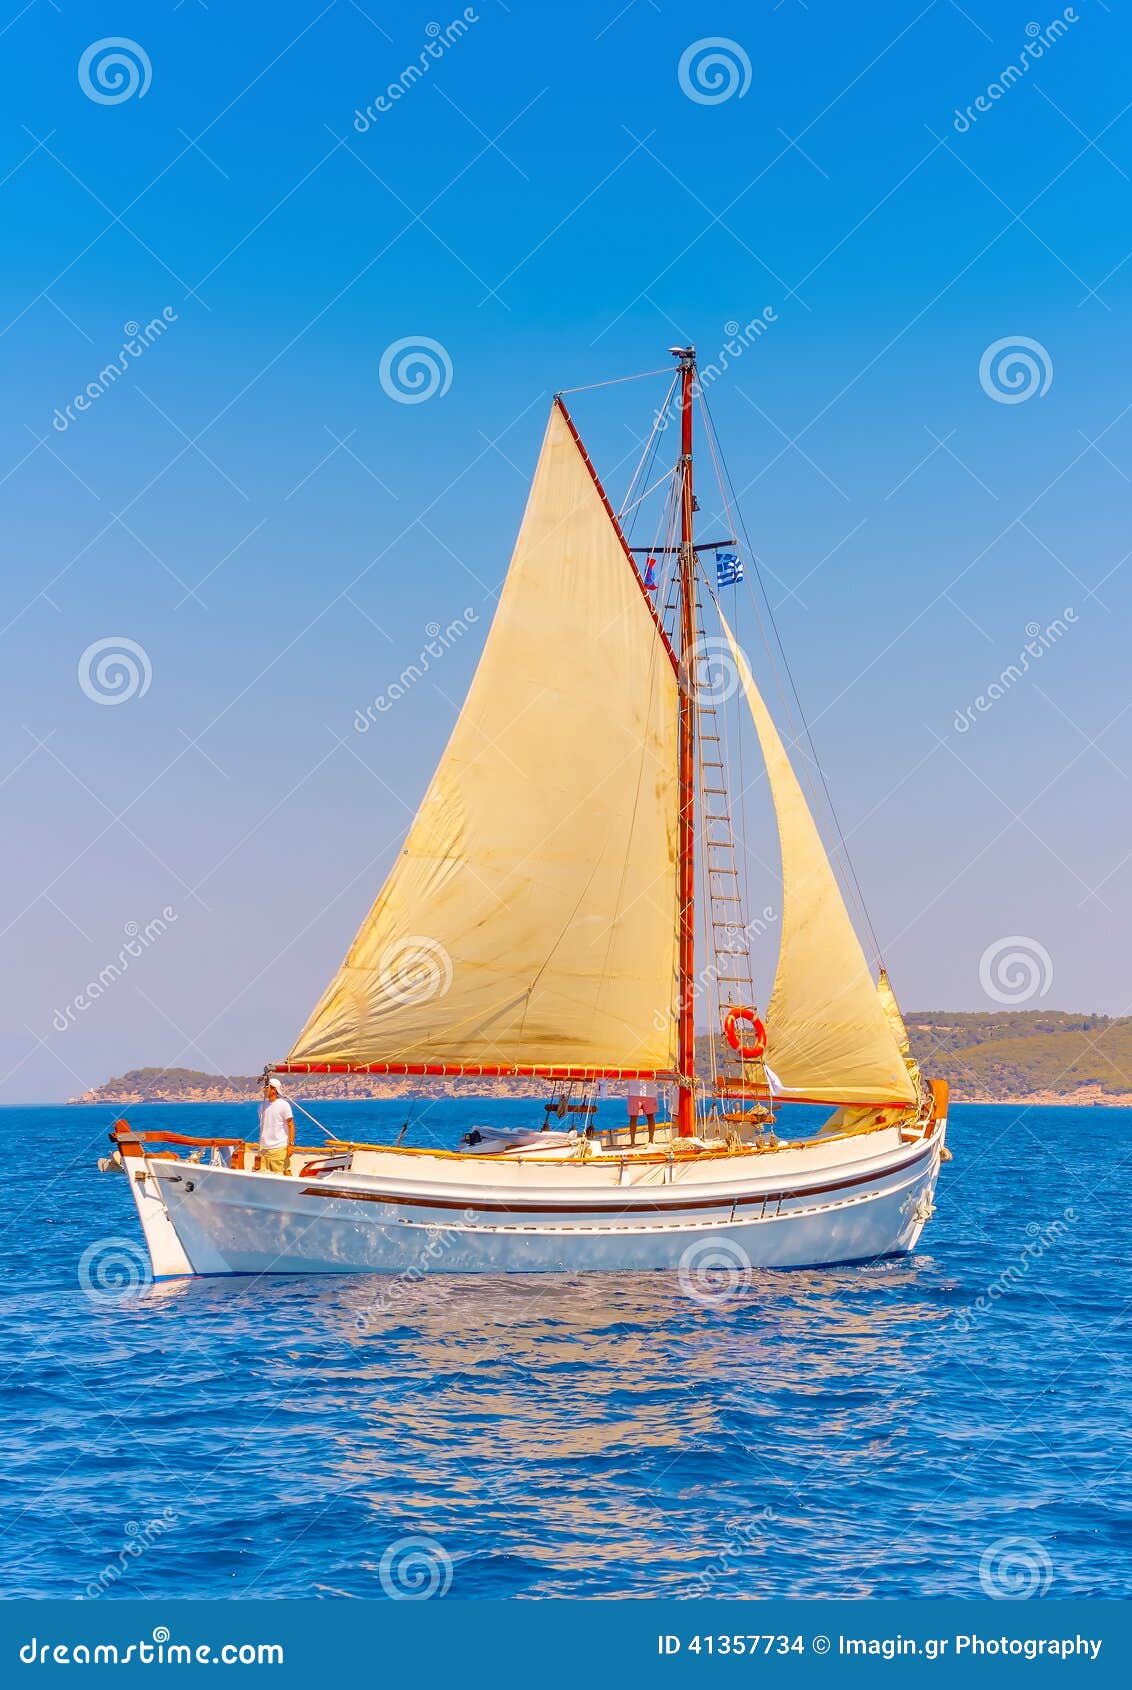 Classic Wooden Sailing Boat Editorial Stock Image - Image 